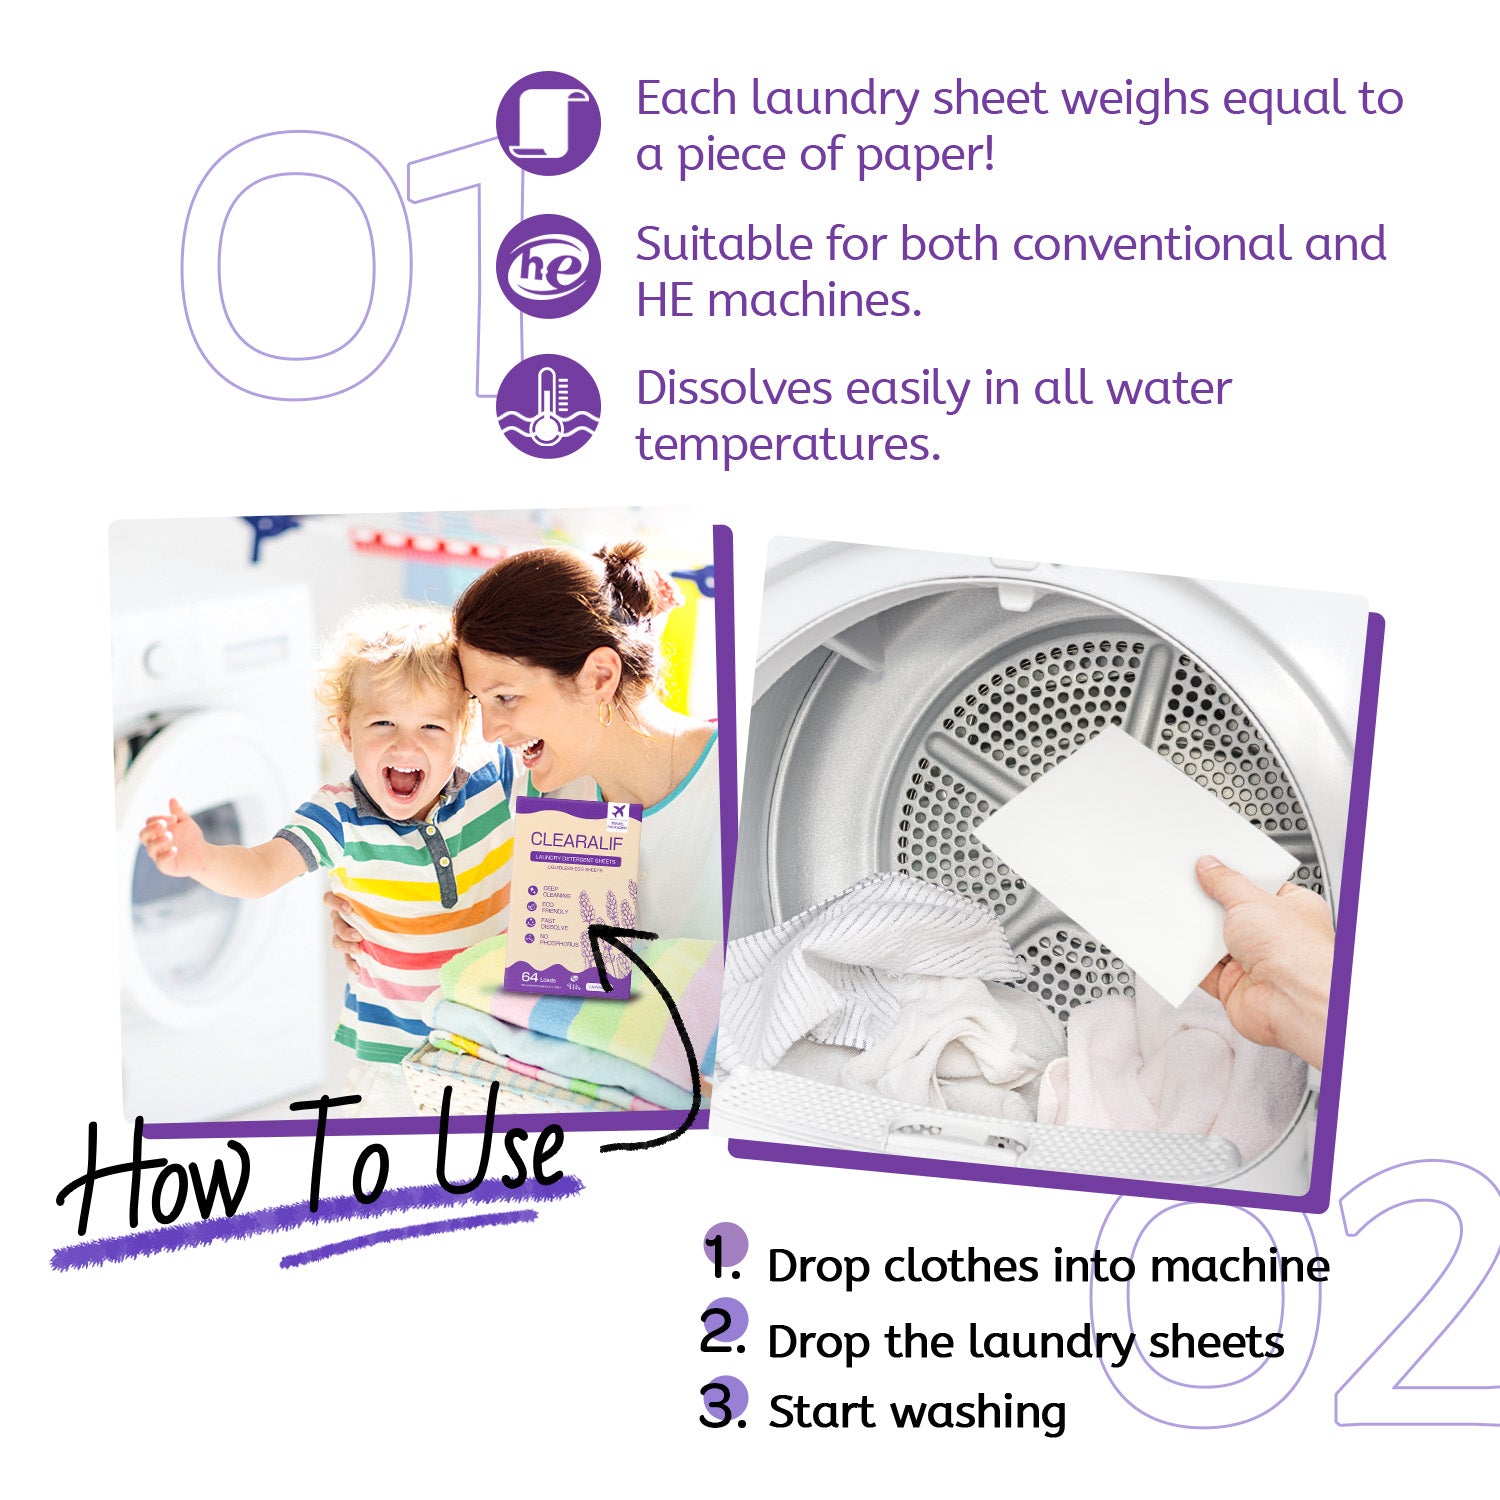 CLEARALIF Eco Friendly & Hypoallergenic Laundry Detergent Sheets 64 Loads, Lavender